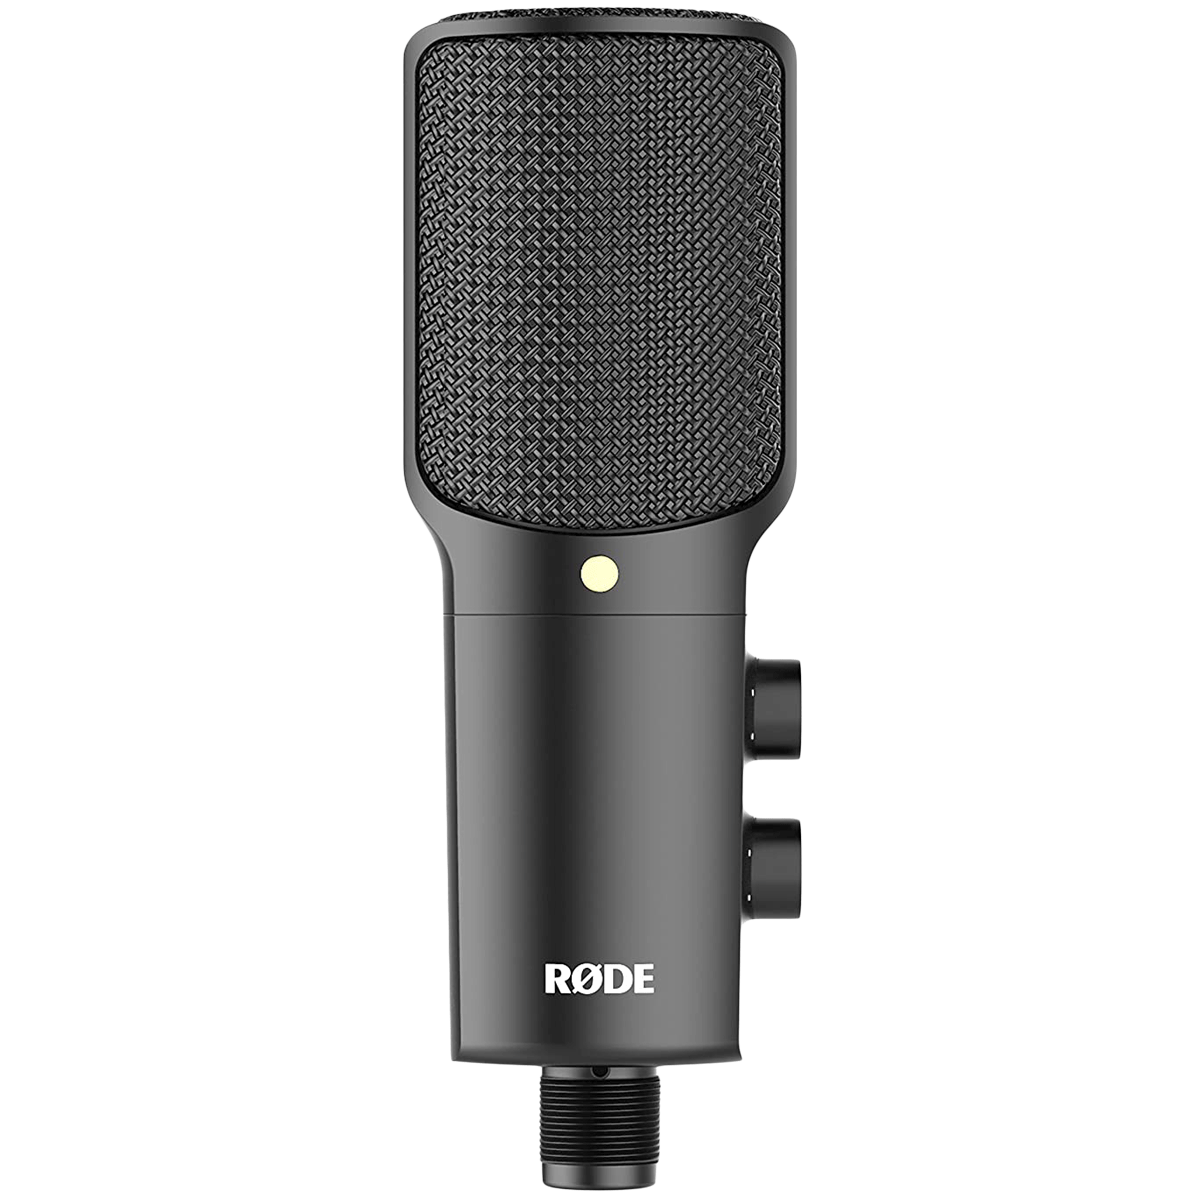 Rode NT Hanging Wired Condenser Microphone (Cardioid Pickup Pattern, NT-USB, Black)_1